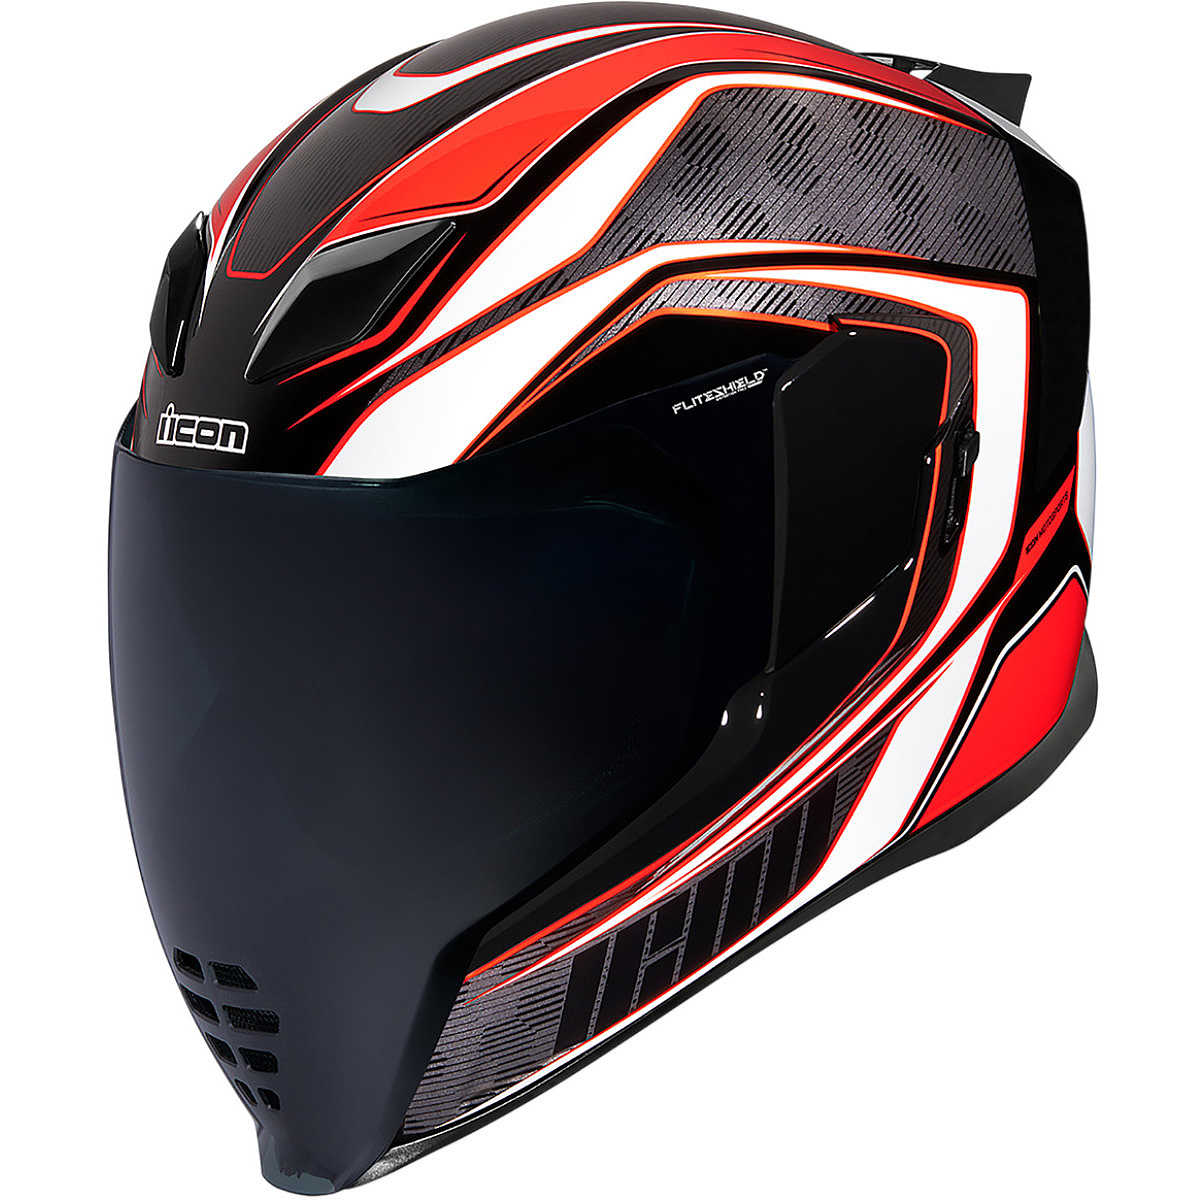 https://data.outletmoto.eu/imgprodotto/casque-moto-int%C3%A9gral-double-visi%C3%A8re-icon-airflite-raceflit-rouge_110377_zoom.jpg